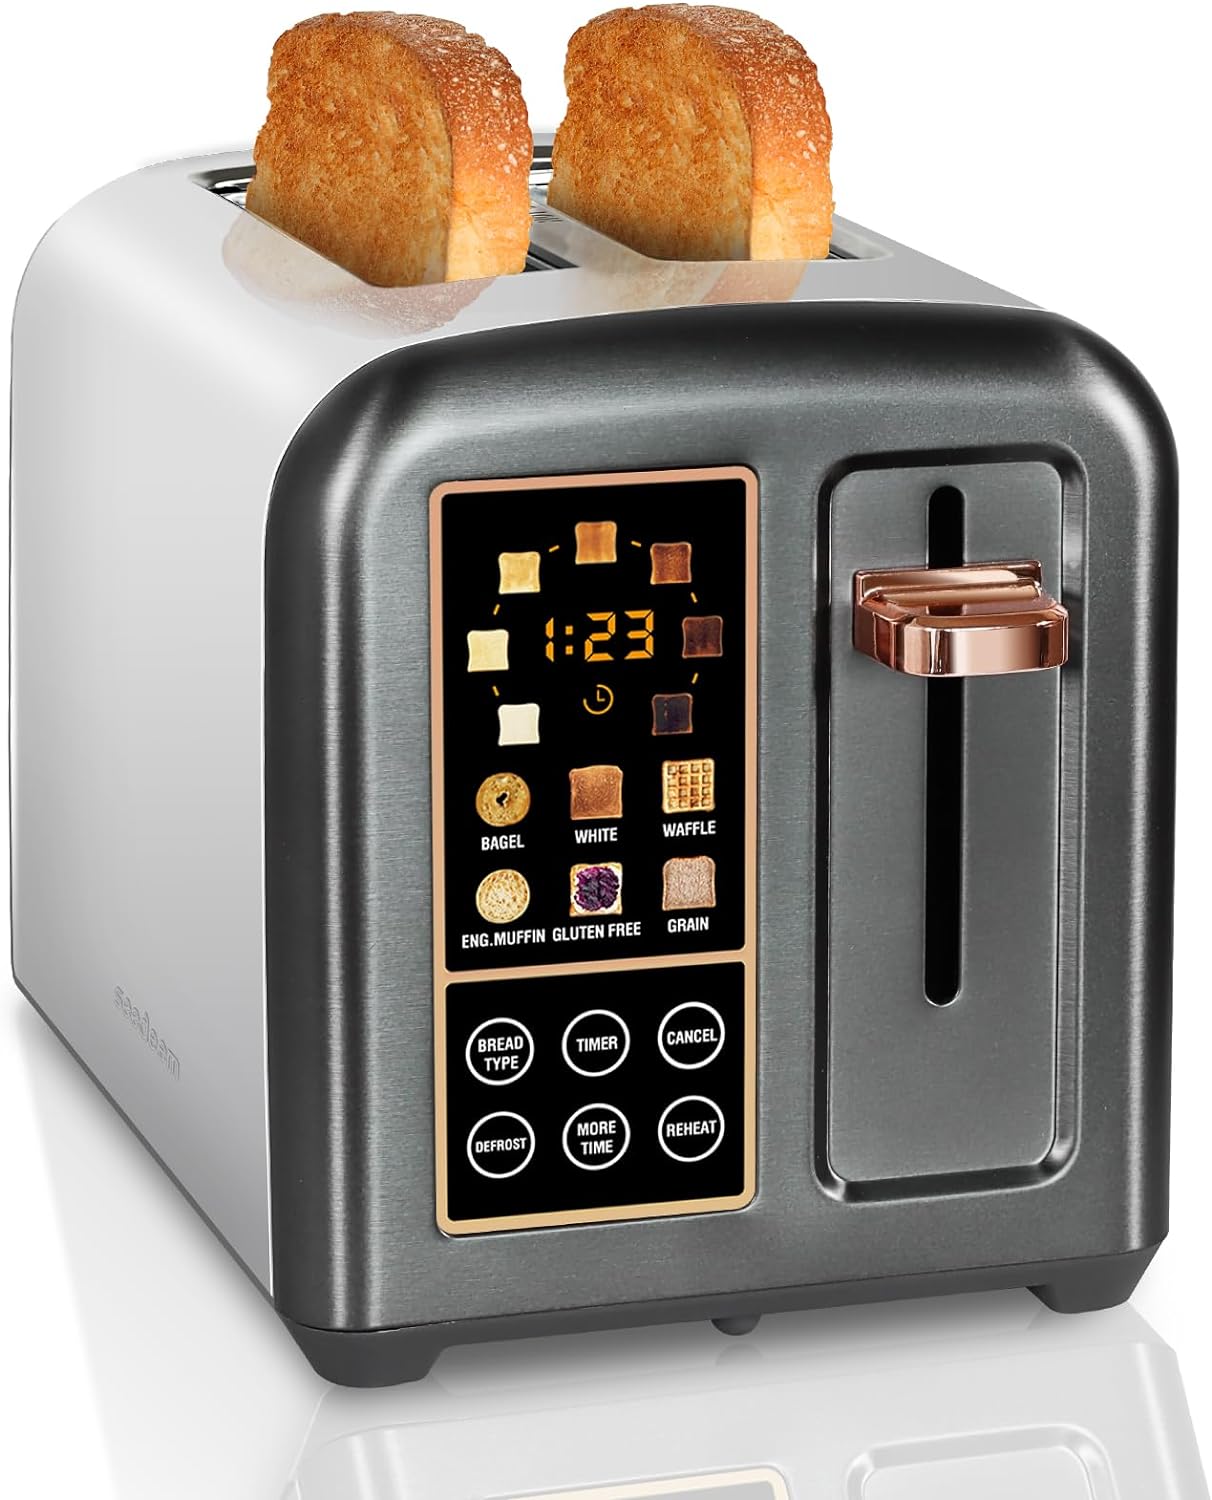 SEEDEEM Toaster 2 Slice, Stainless Steel Bread Toaster with LCD Display and Touch Buttons, 50% Faster Heating Speed, 6 Bread Selection, 7 Shade Settings, 1.5Wide Slots Toaster with Cancel/Defrost/Reheat Functions, Removable Crumb Tray, 1350W, Dark Metallic